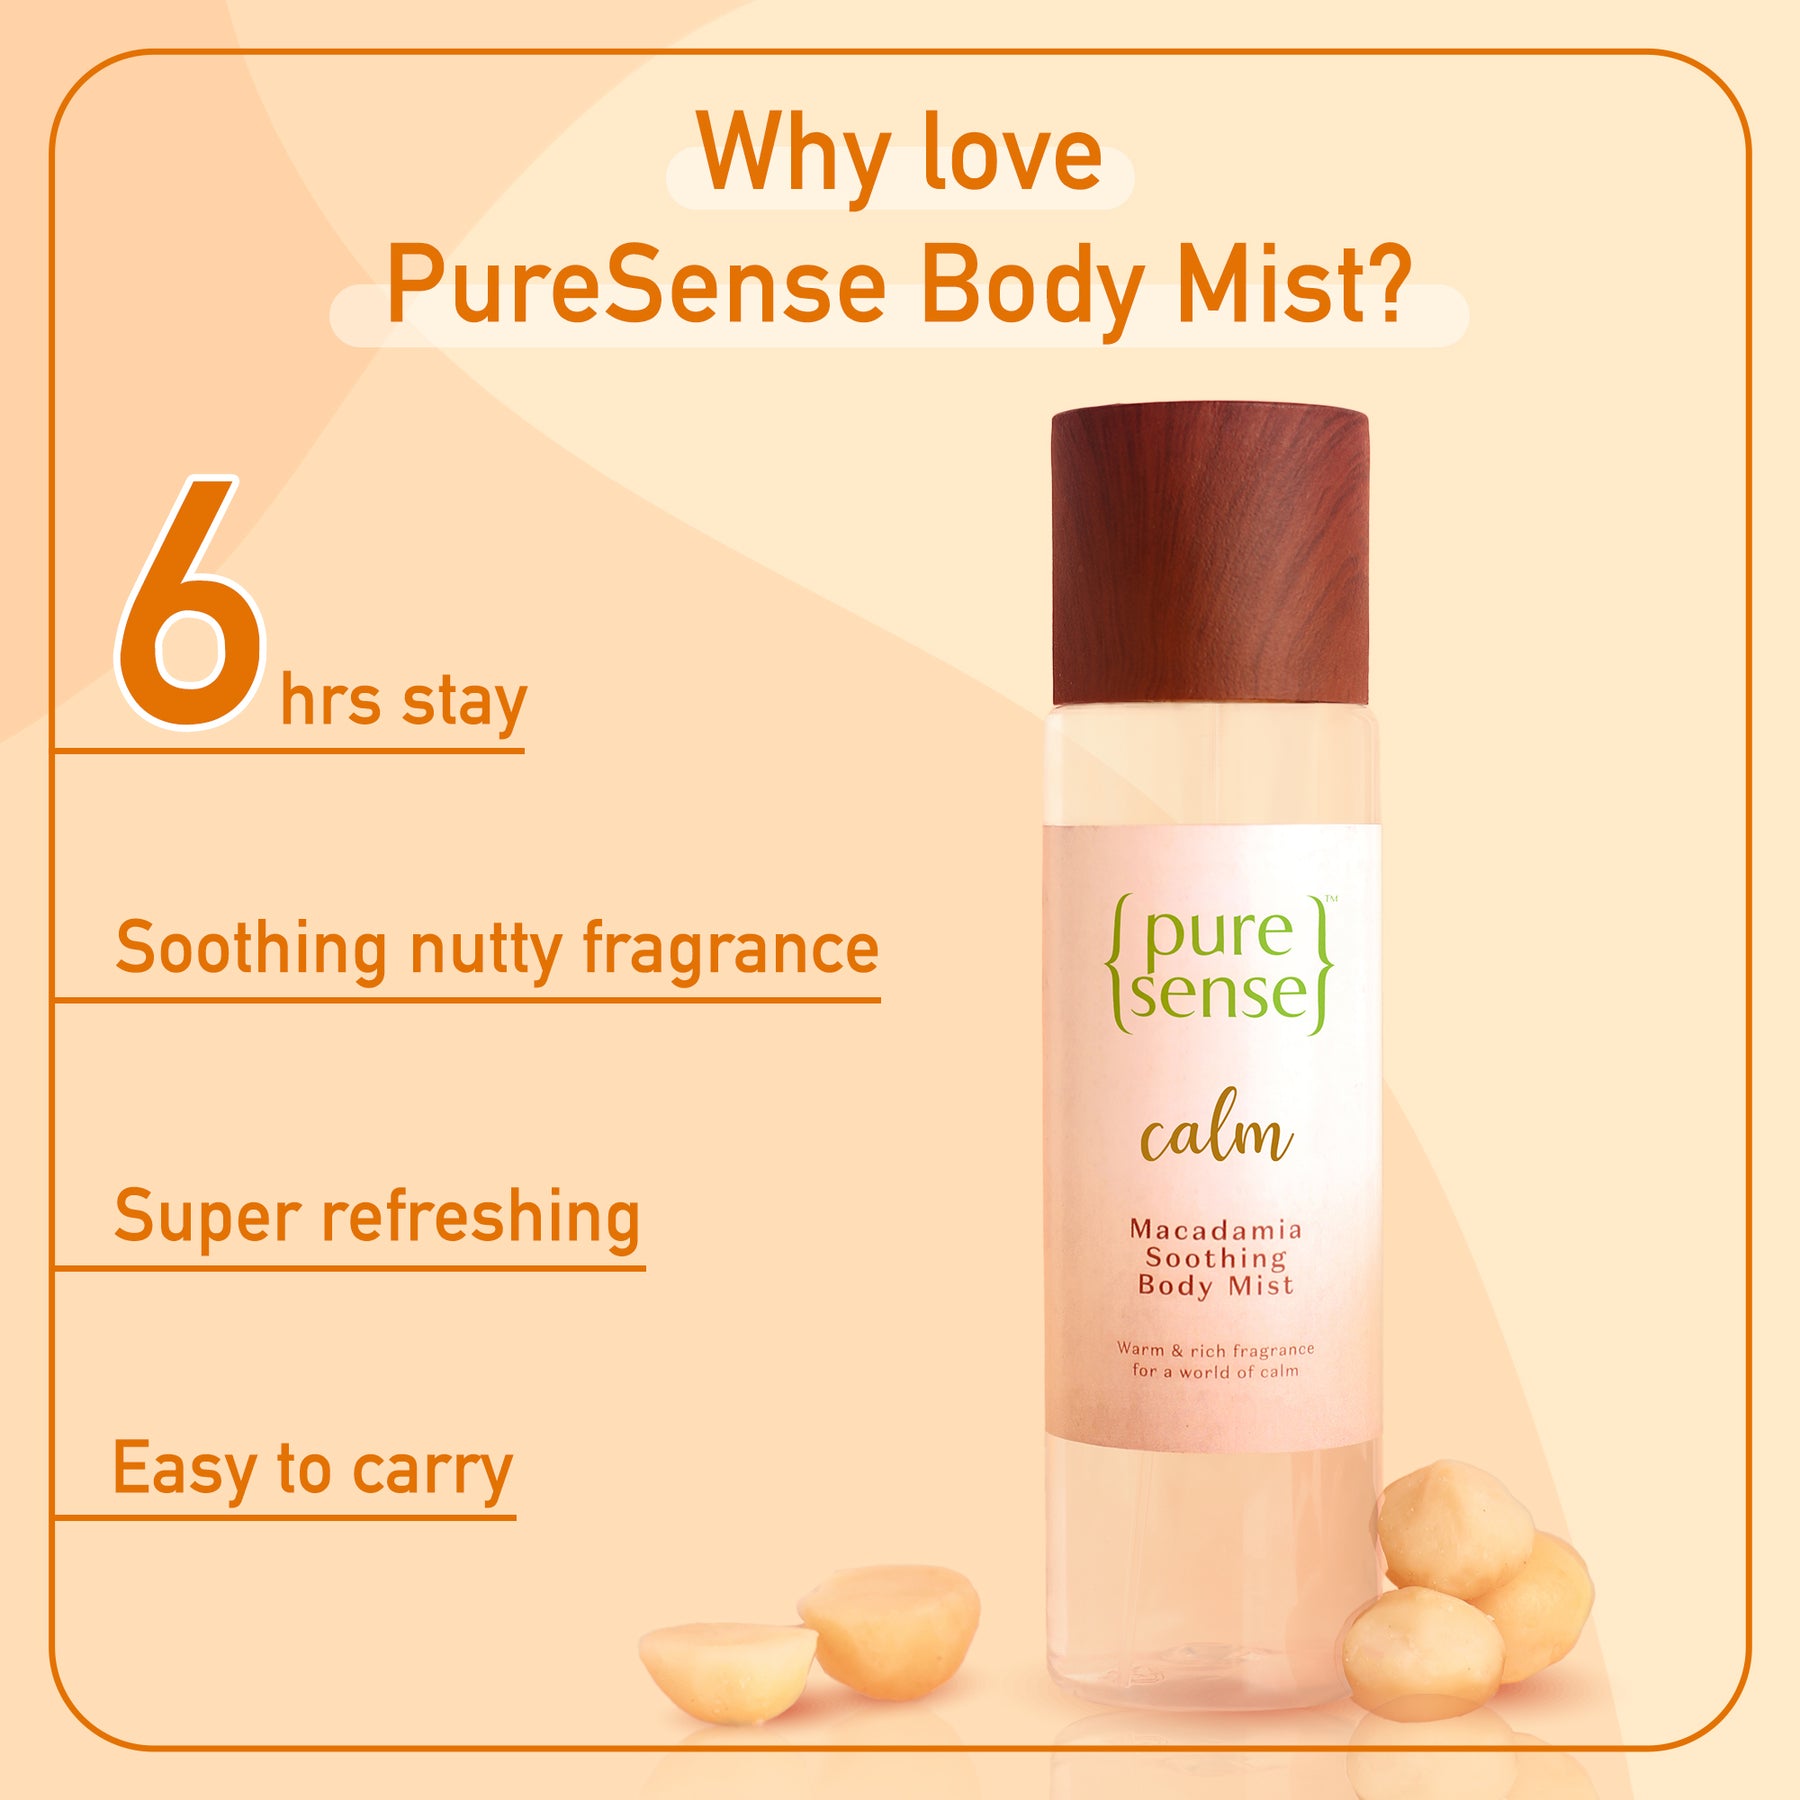 Calm Macadamia Soothing Body Mist | Paraben & Sulphate Free | From the makers of Parachute Advansed | 150ml - PureSense